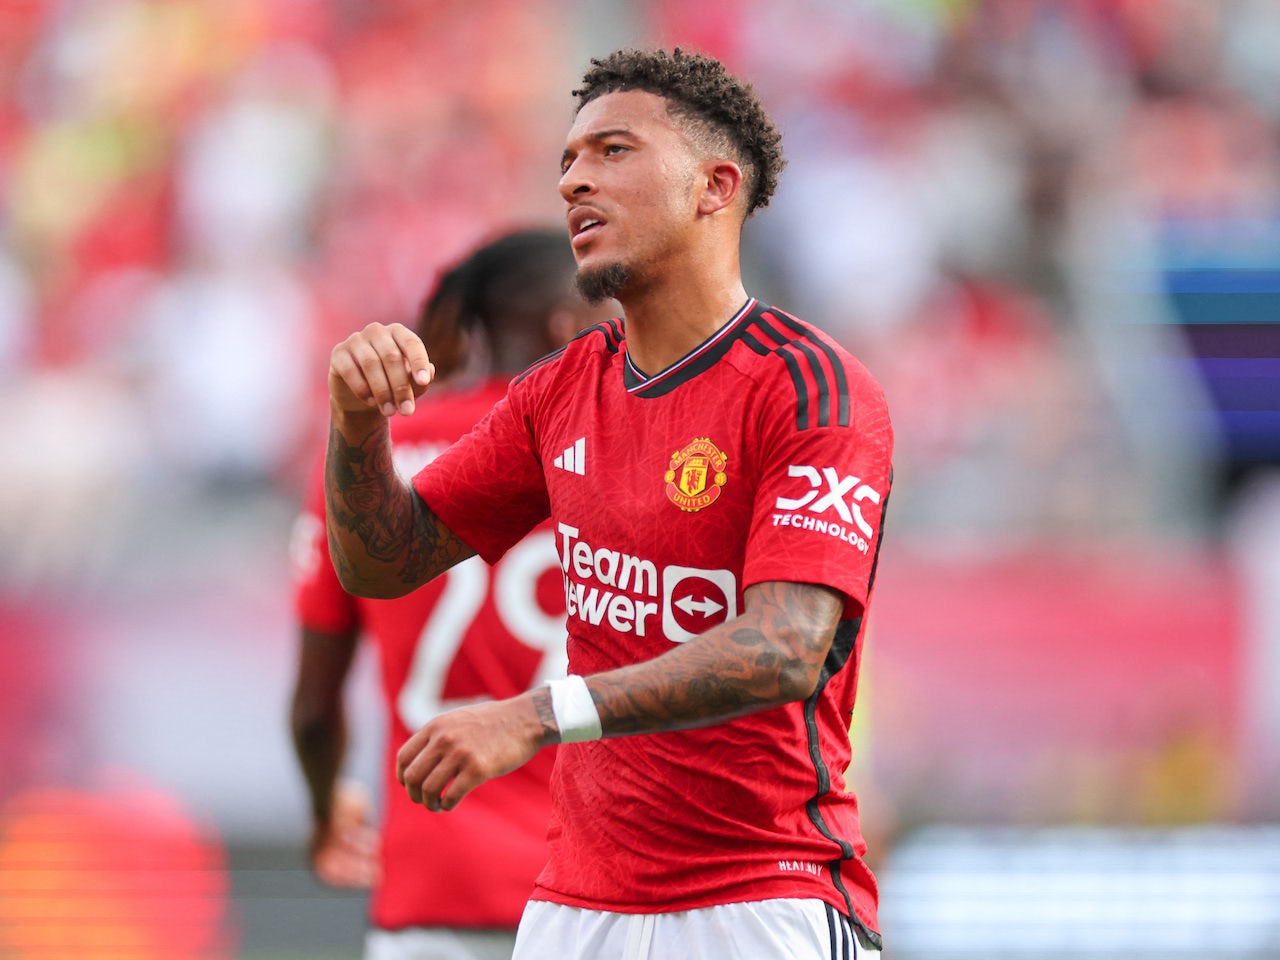 Erik ten Hag: 'Jadon Sancho's time at Manchester United plagued by issues'